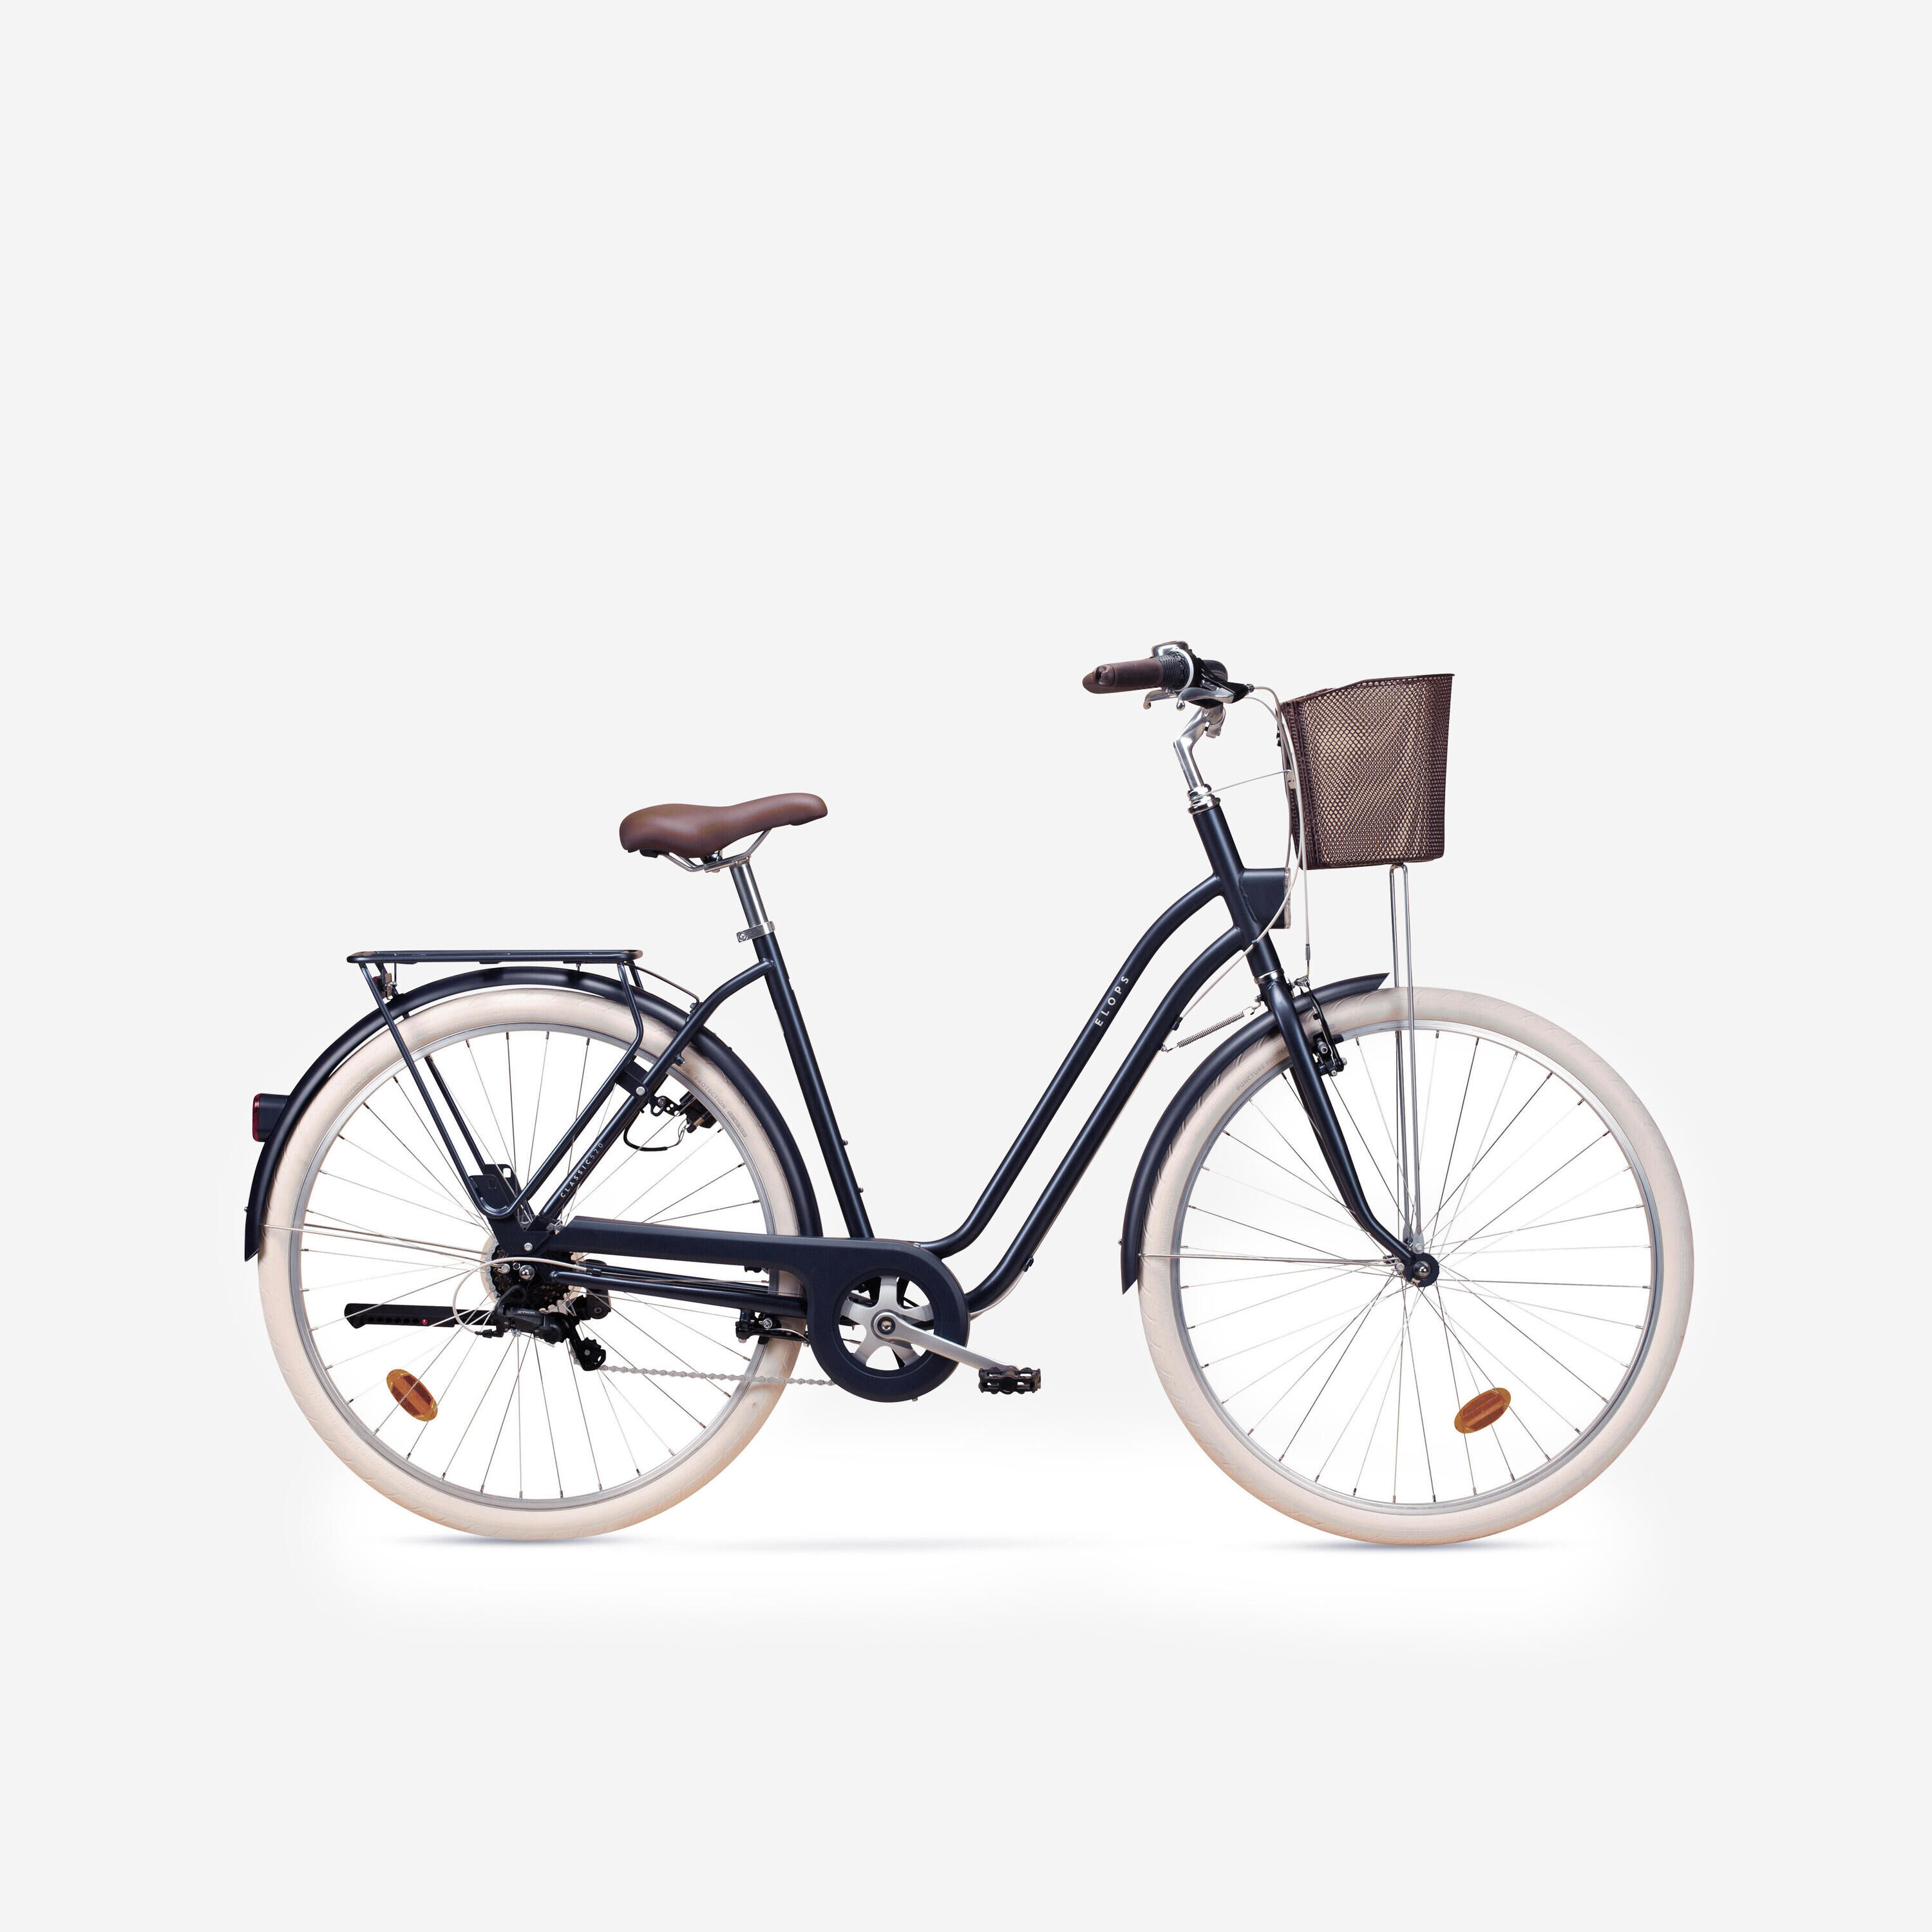 ELOPS Fully-equipped, 6-speed low frame city bike, blue